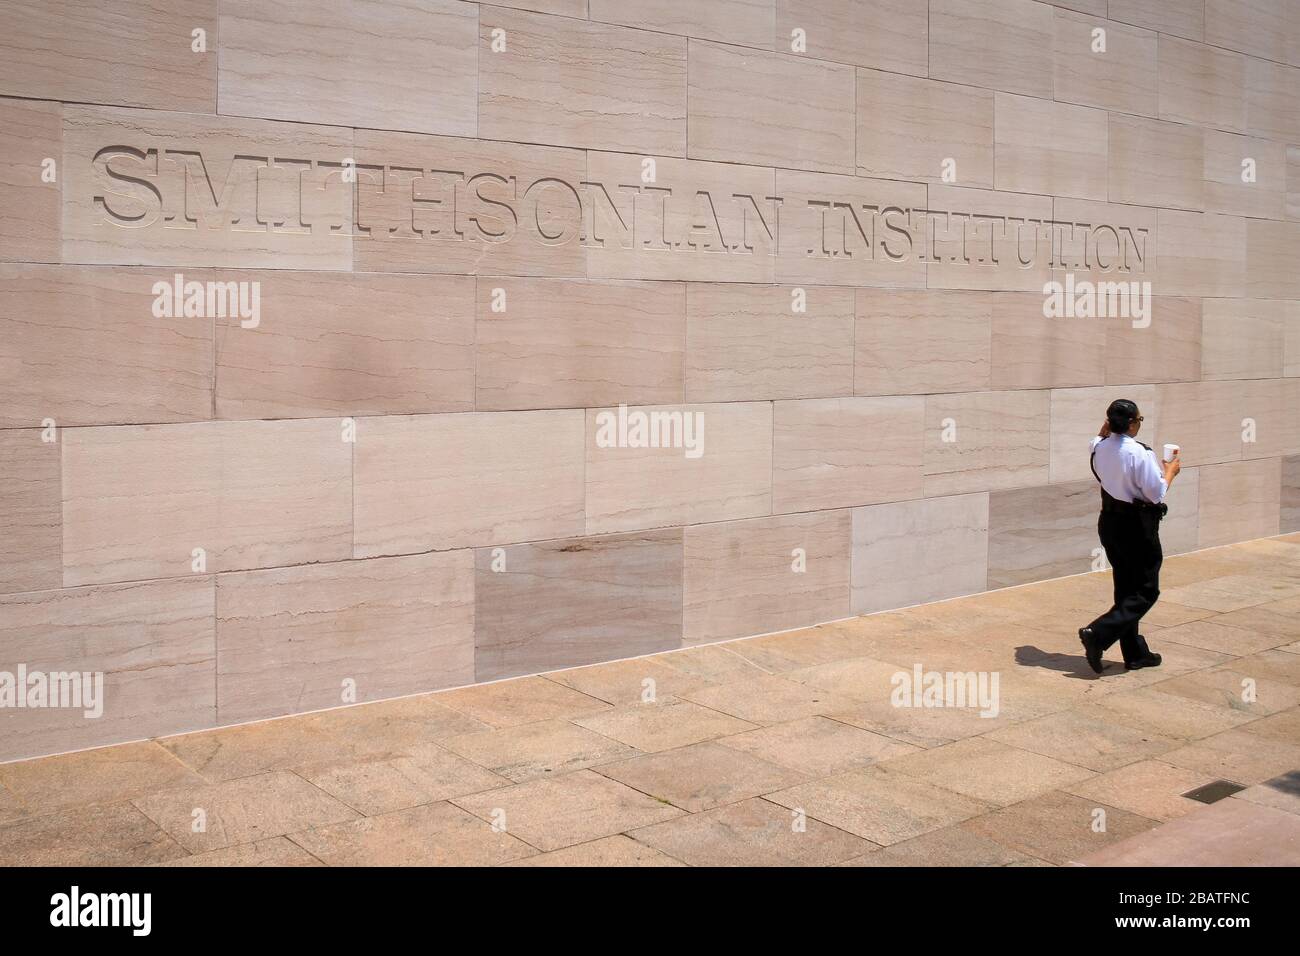 Smithsonian Institute sign on a wall at the National Mall in Washington DC, with a security guard passing in front of it. Stock Photo